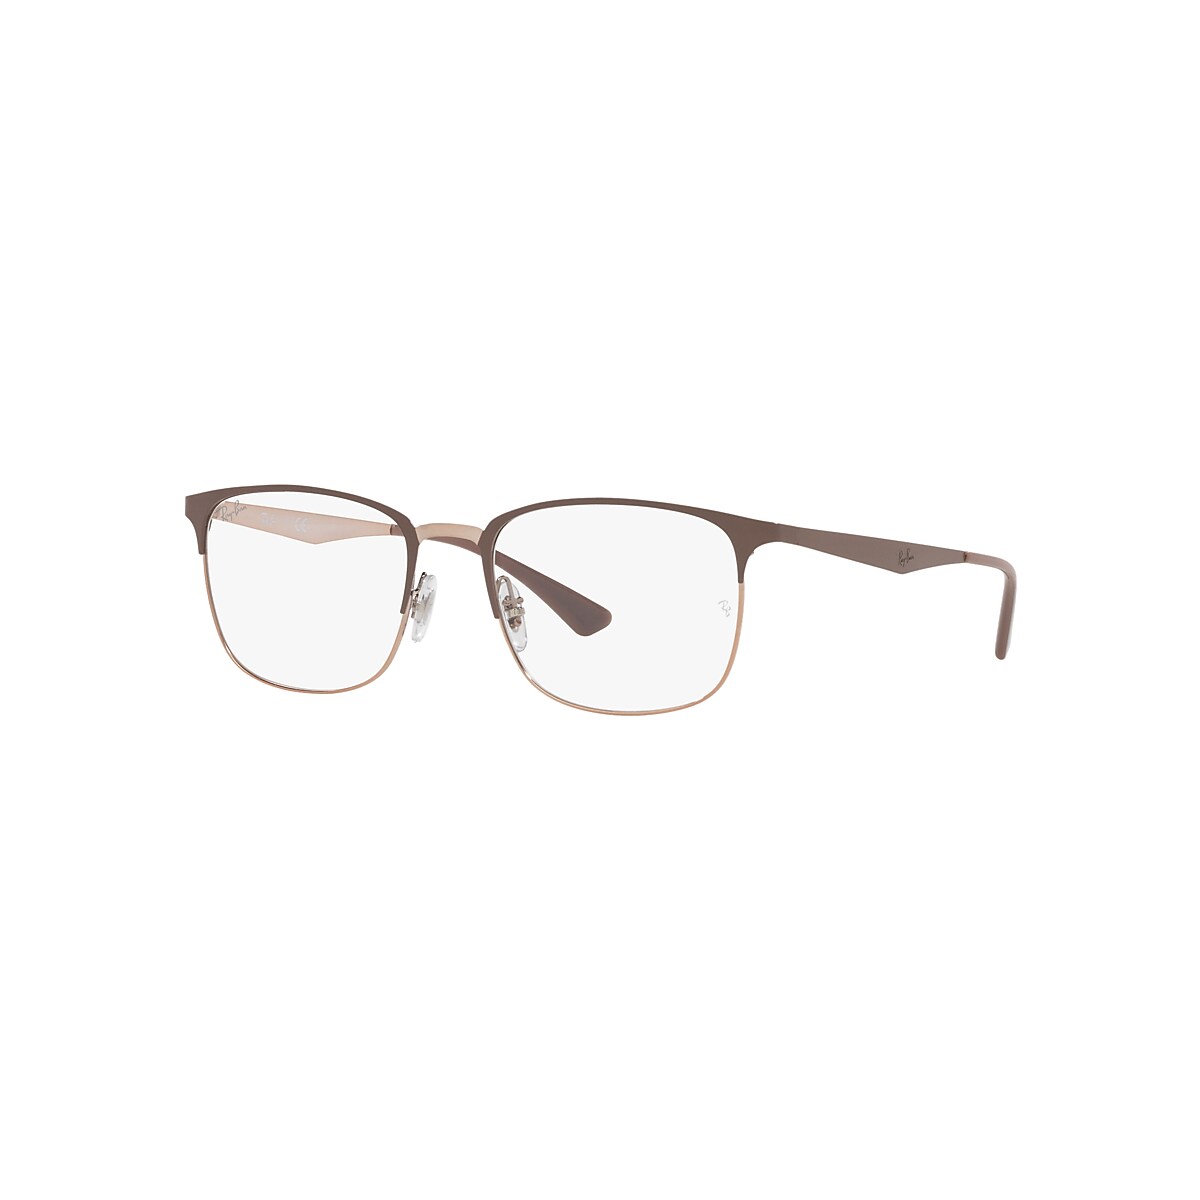 victim Disgrace Brig Rb6421 Eyeglasses with Light Brown Frame | Ray-Ban®